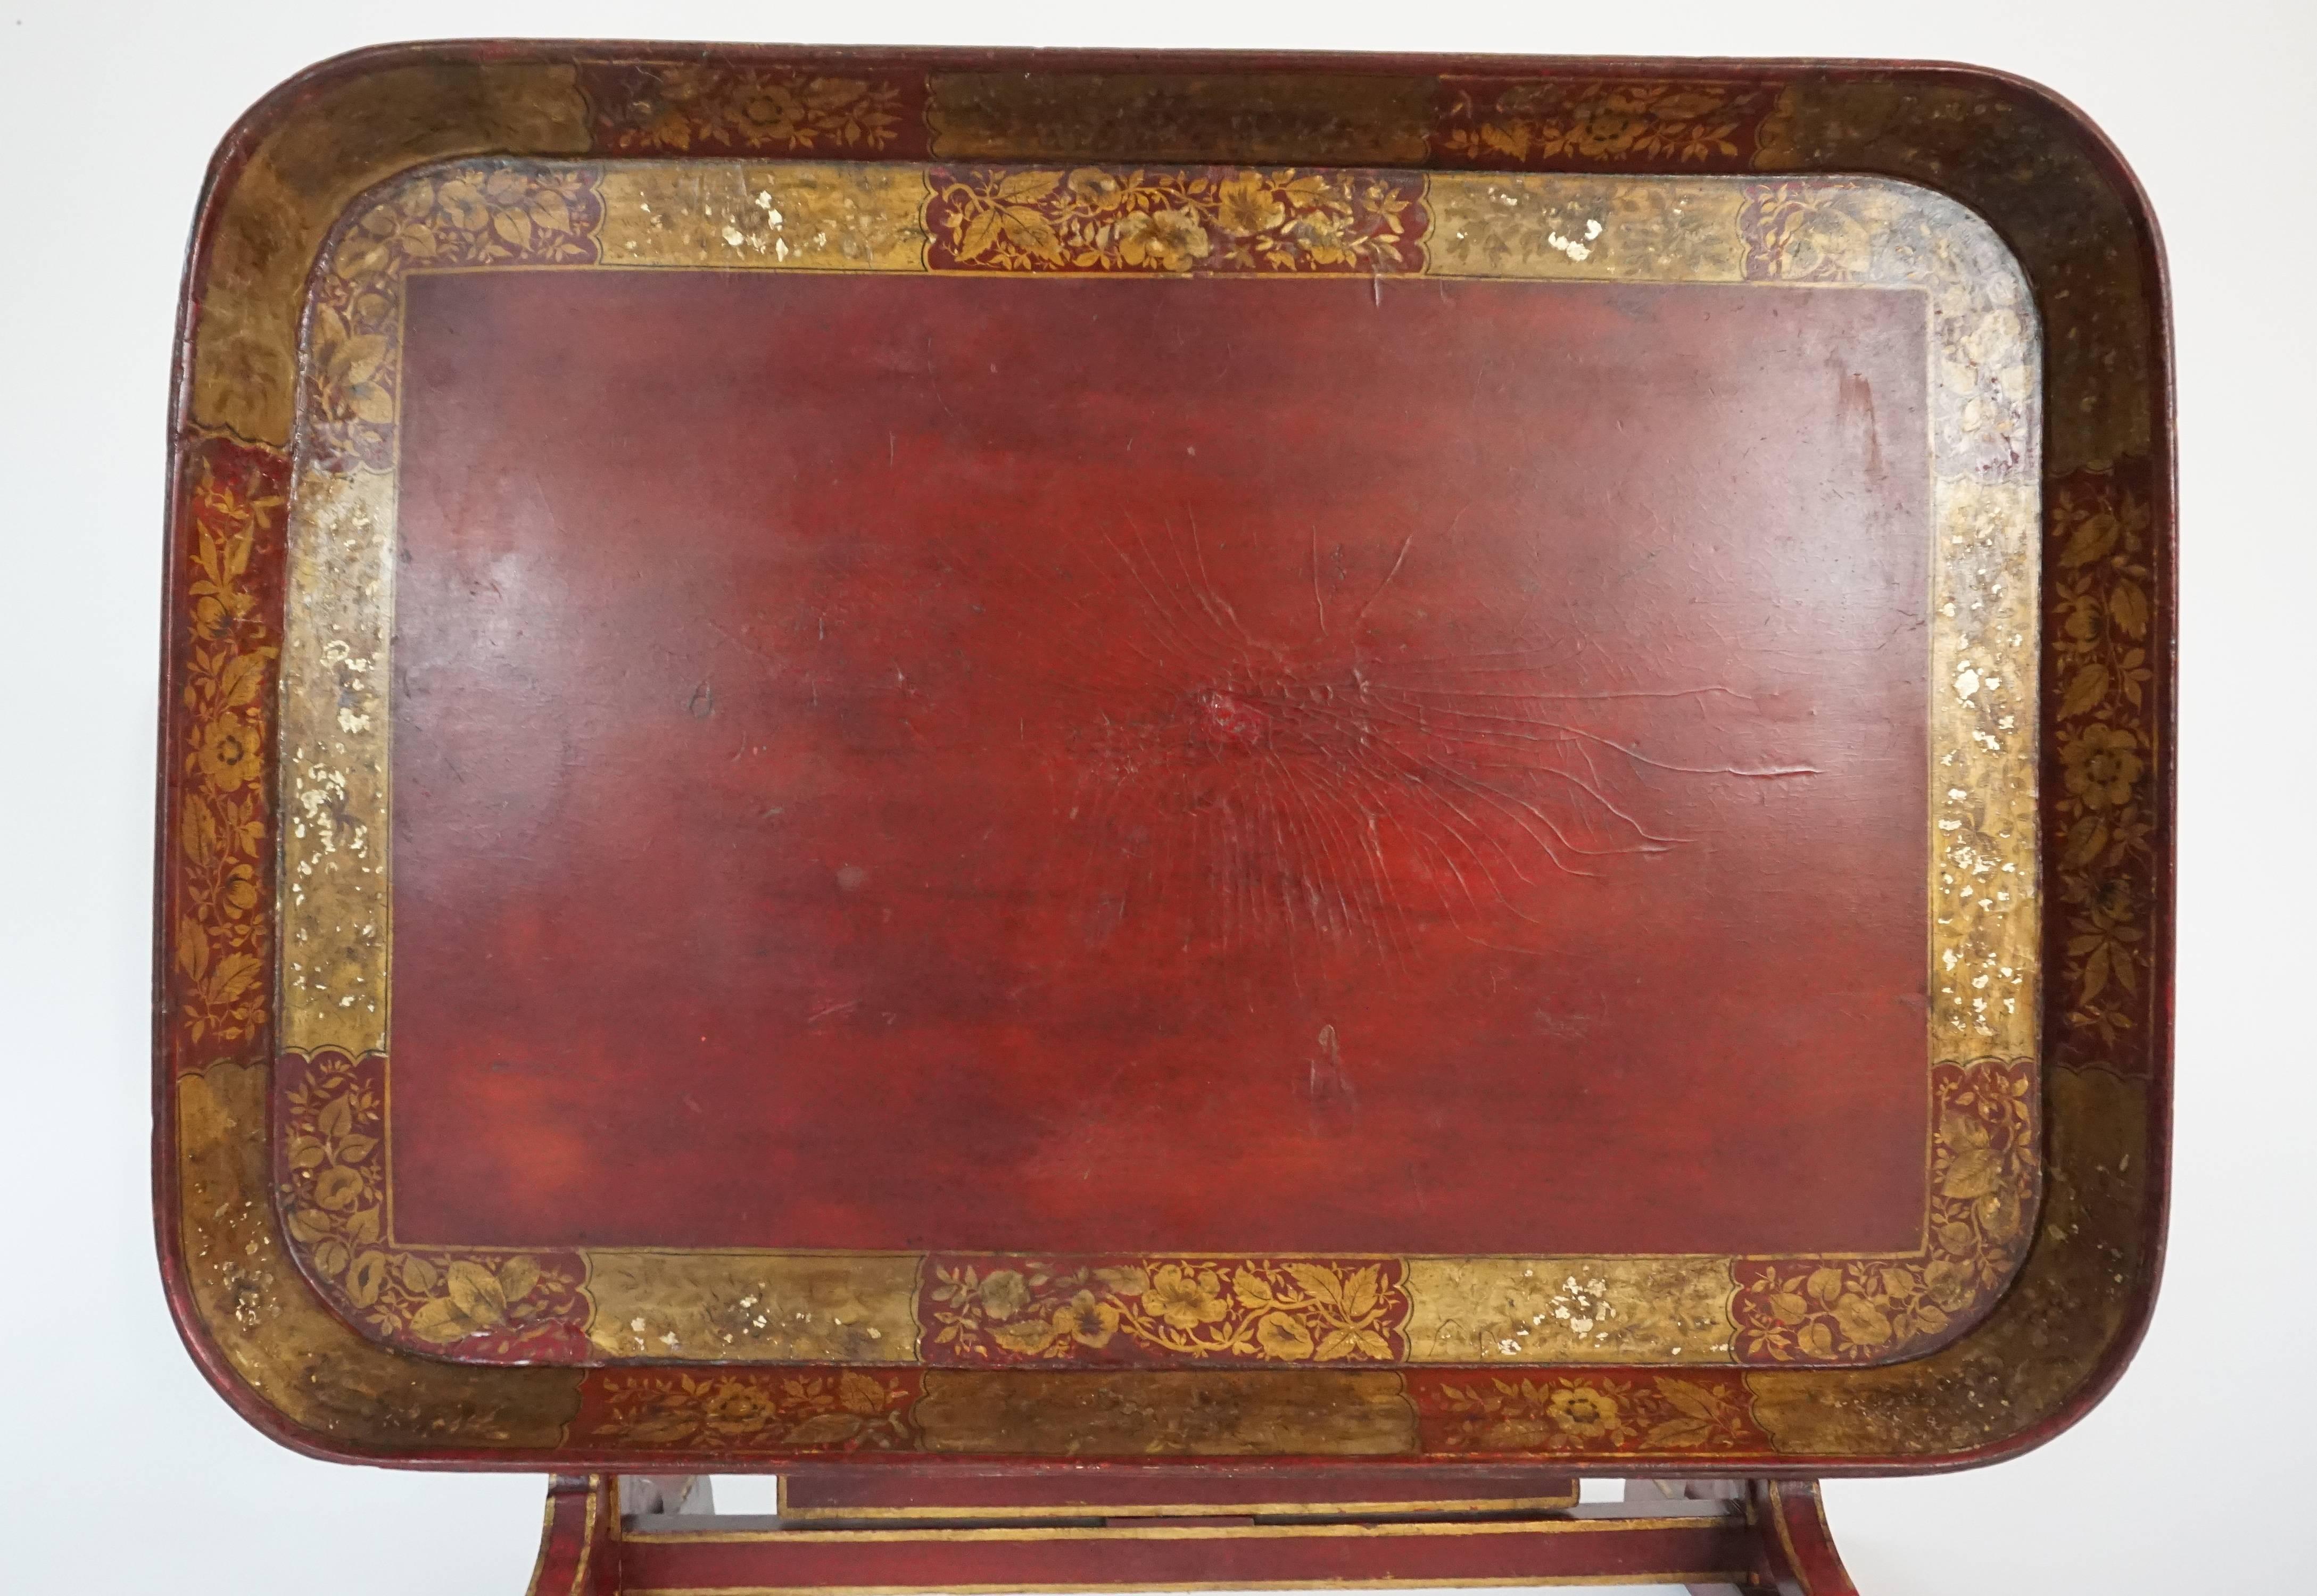 Very rare English Regency period, circa 1810, low table having cinnabar red papier ma^che´ tray top with gilt foliate geometric border on original parcel-gilt tilt-top trestle base Stand with central swiveling butterfly or gate support of